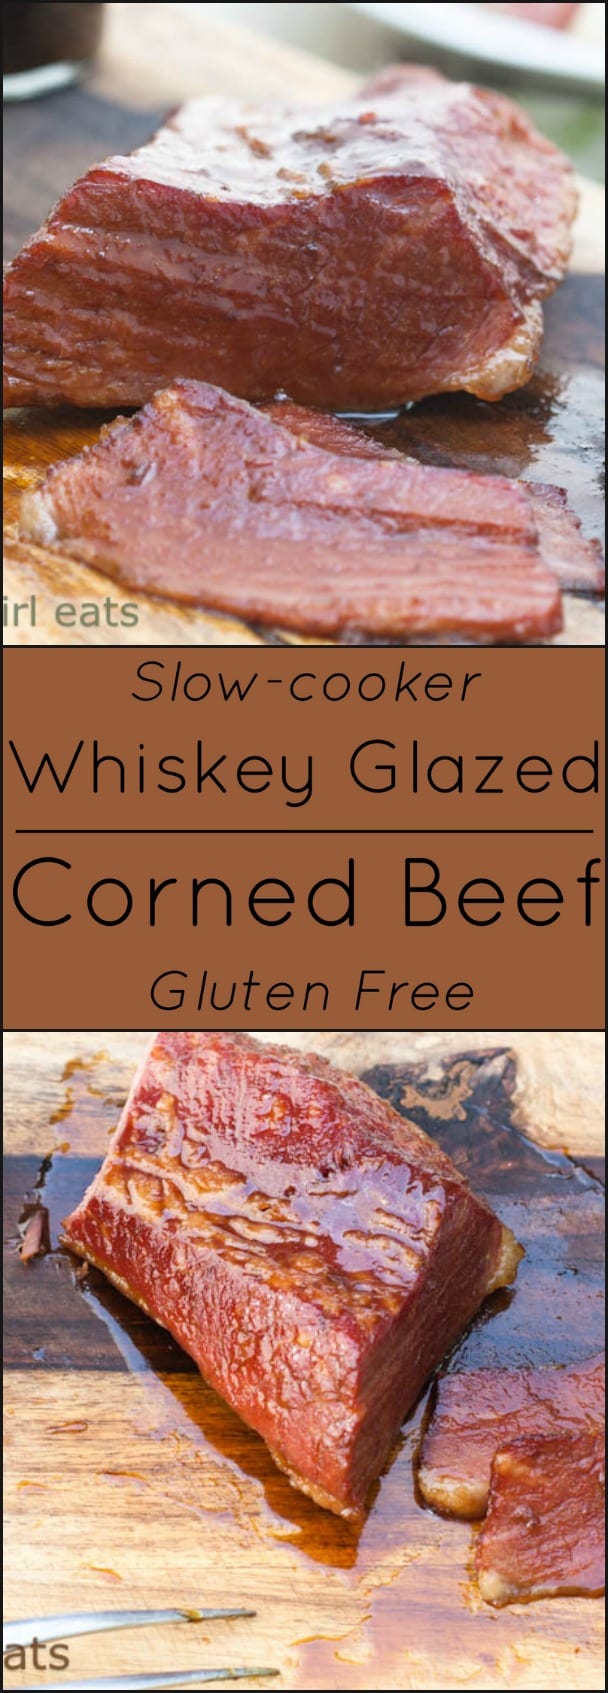 Triple Whiskey Glazed Corned Beef. Slow-cooker and gluten free. 